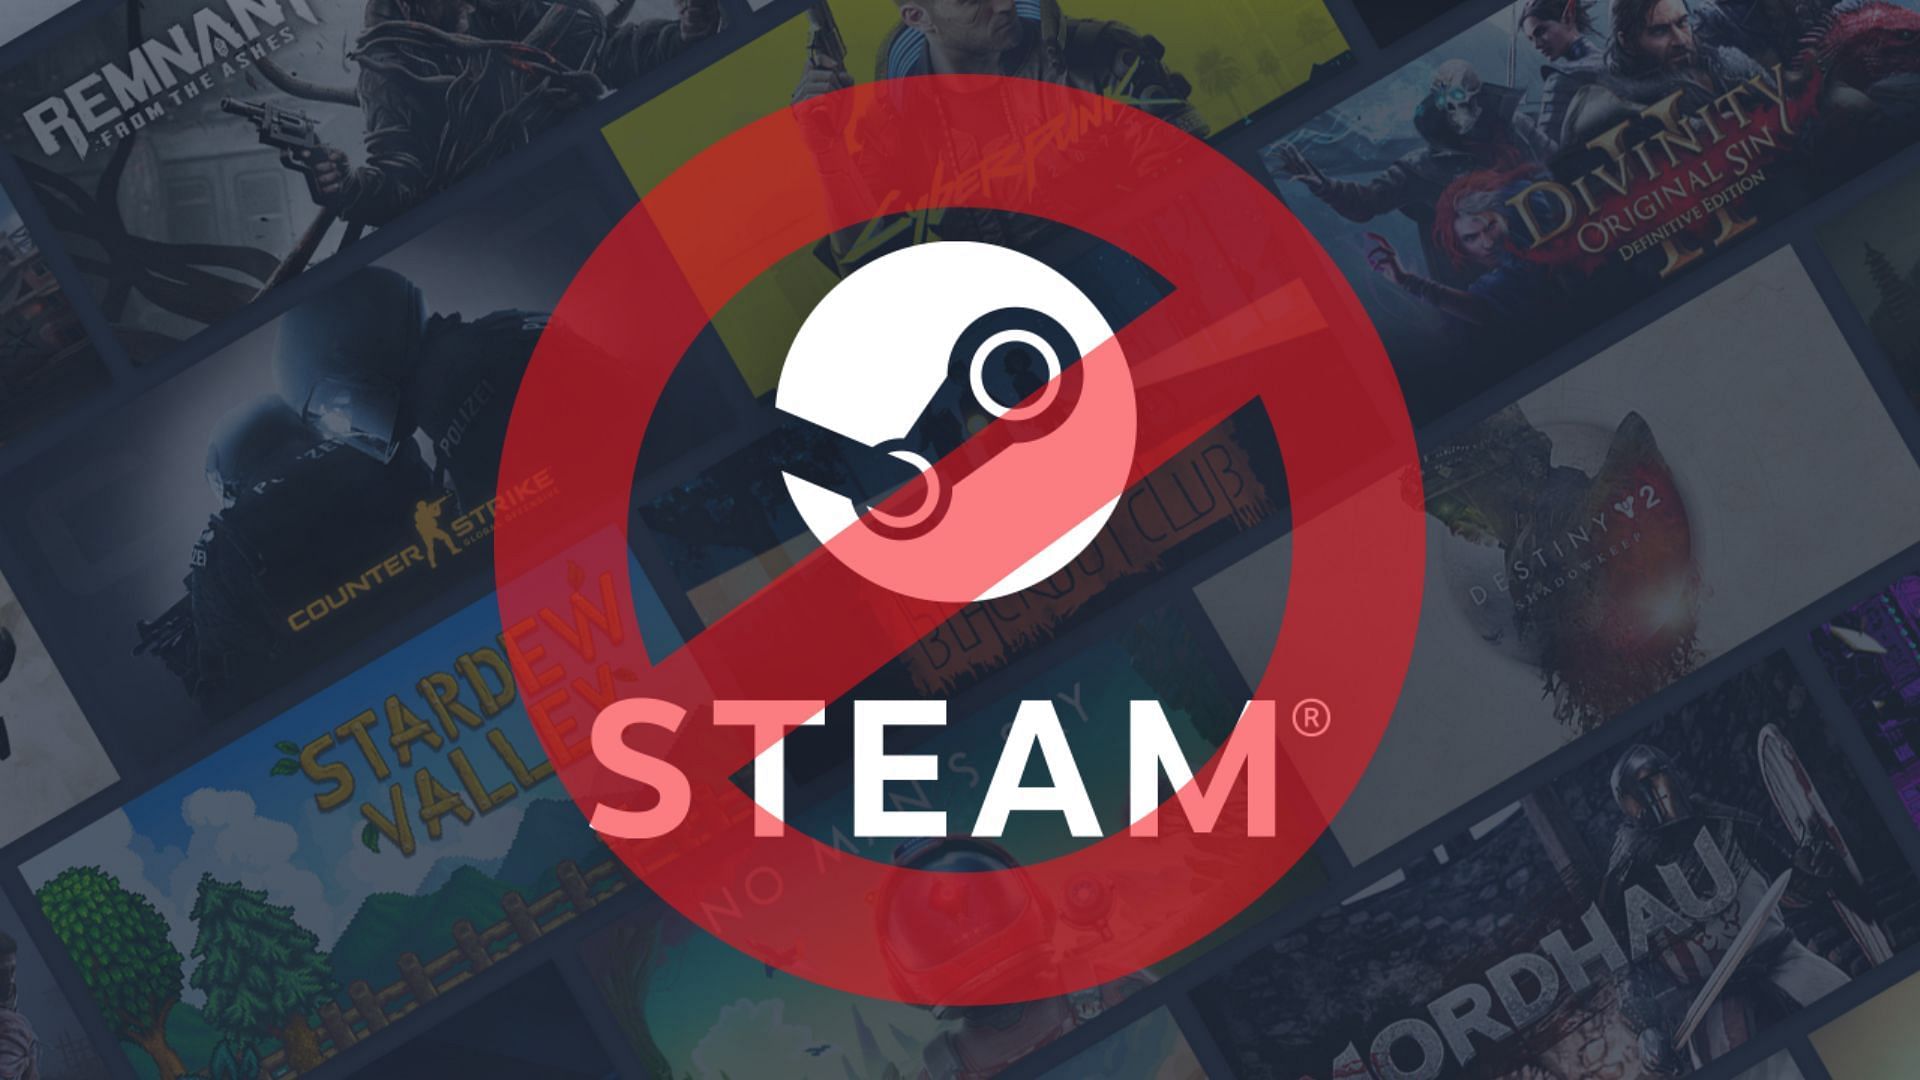 Is Steam getting banned in India? Community speculations arise as Steam  Community and Market become unavailable for some